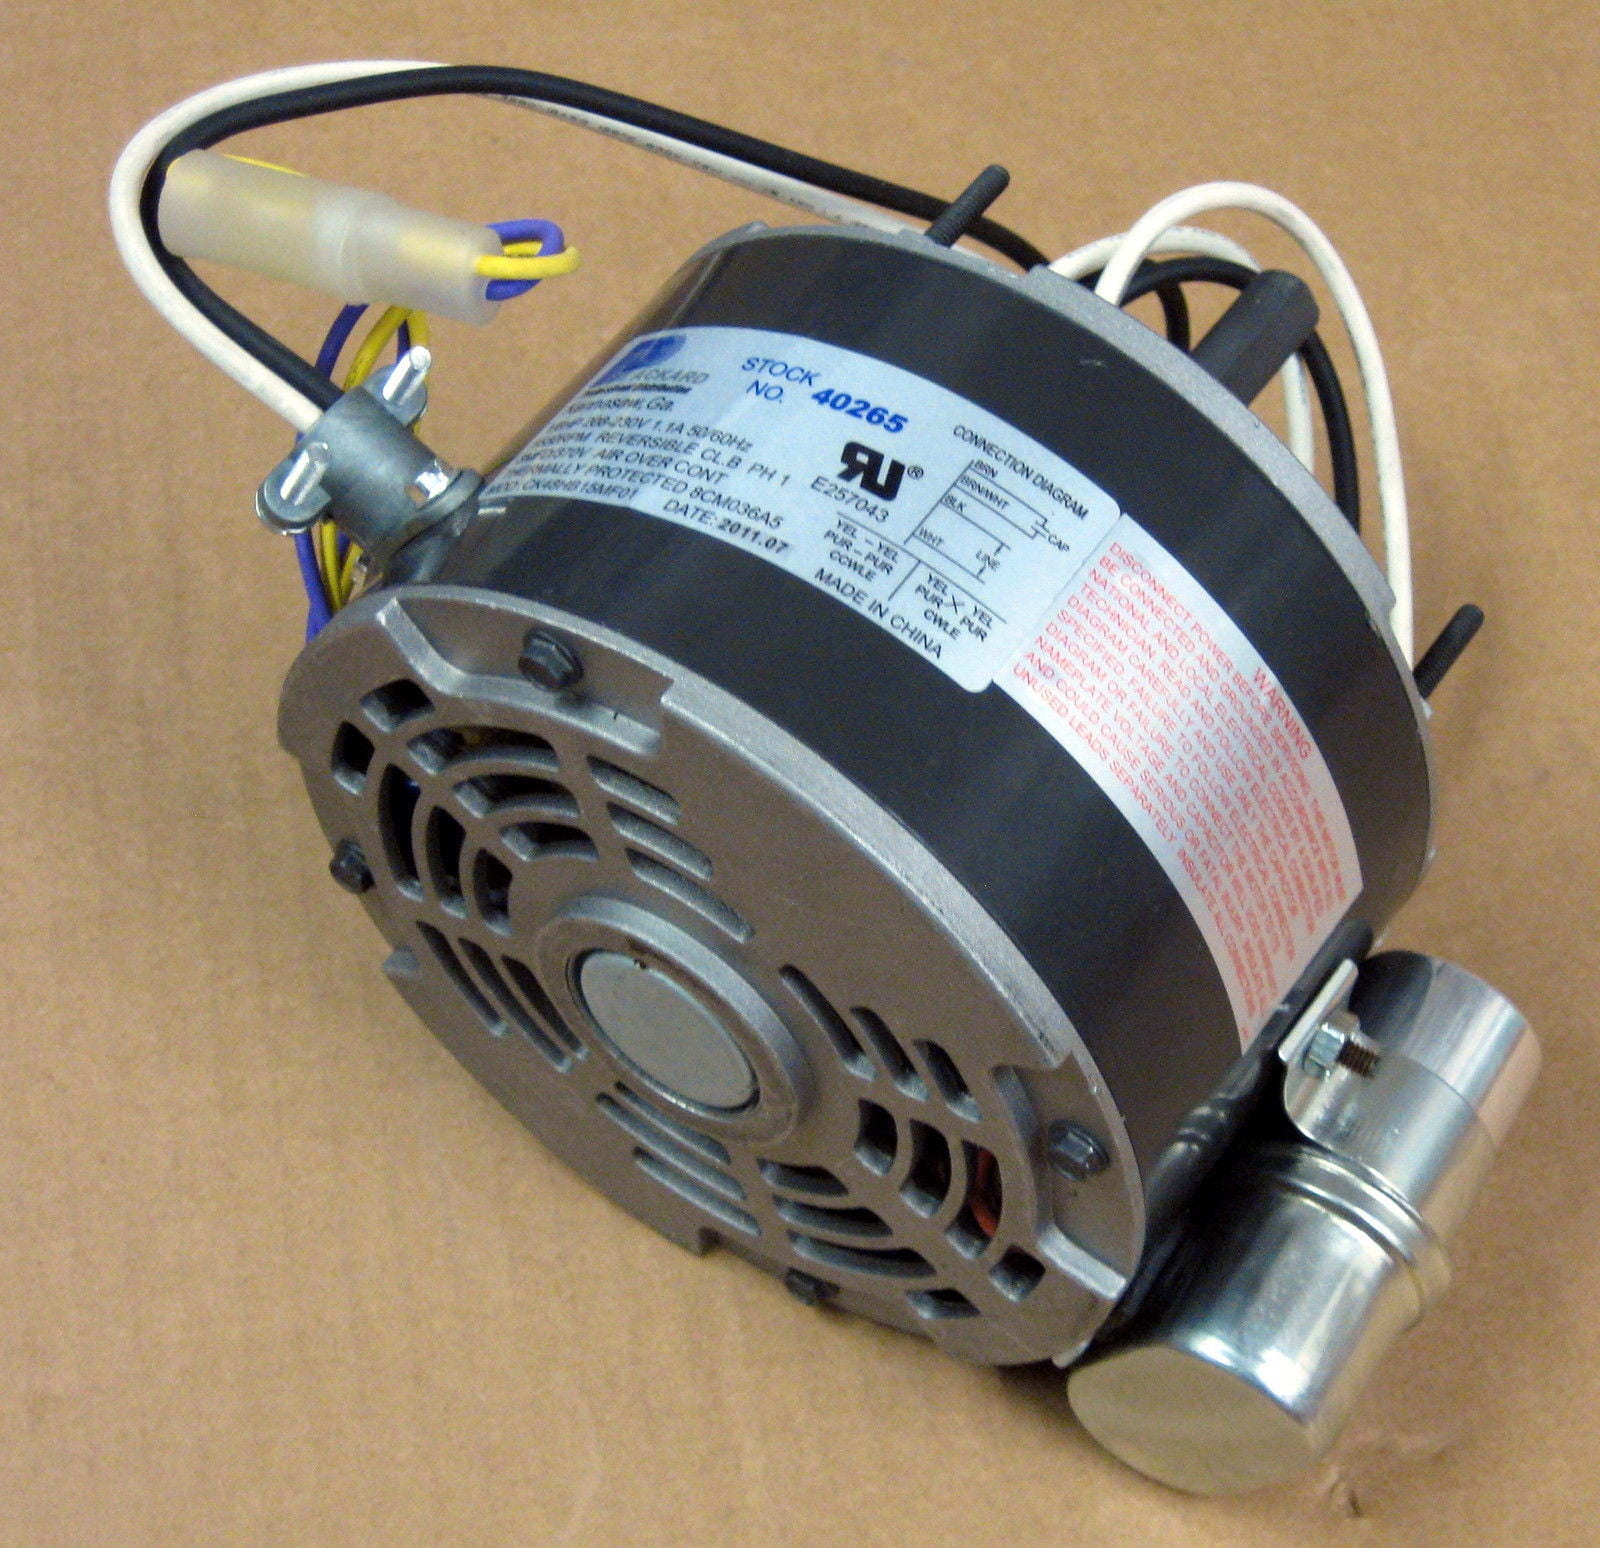 Also Replaces 050-0265-00 & 050-0265-08 New Copeland 950-0265-00 Motor 